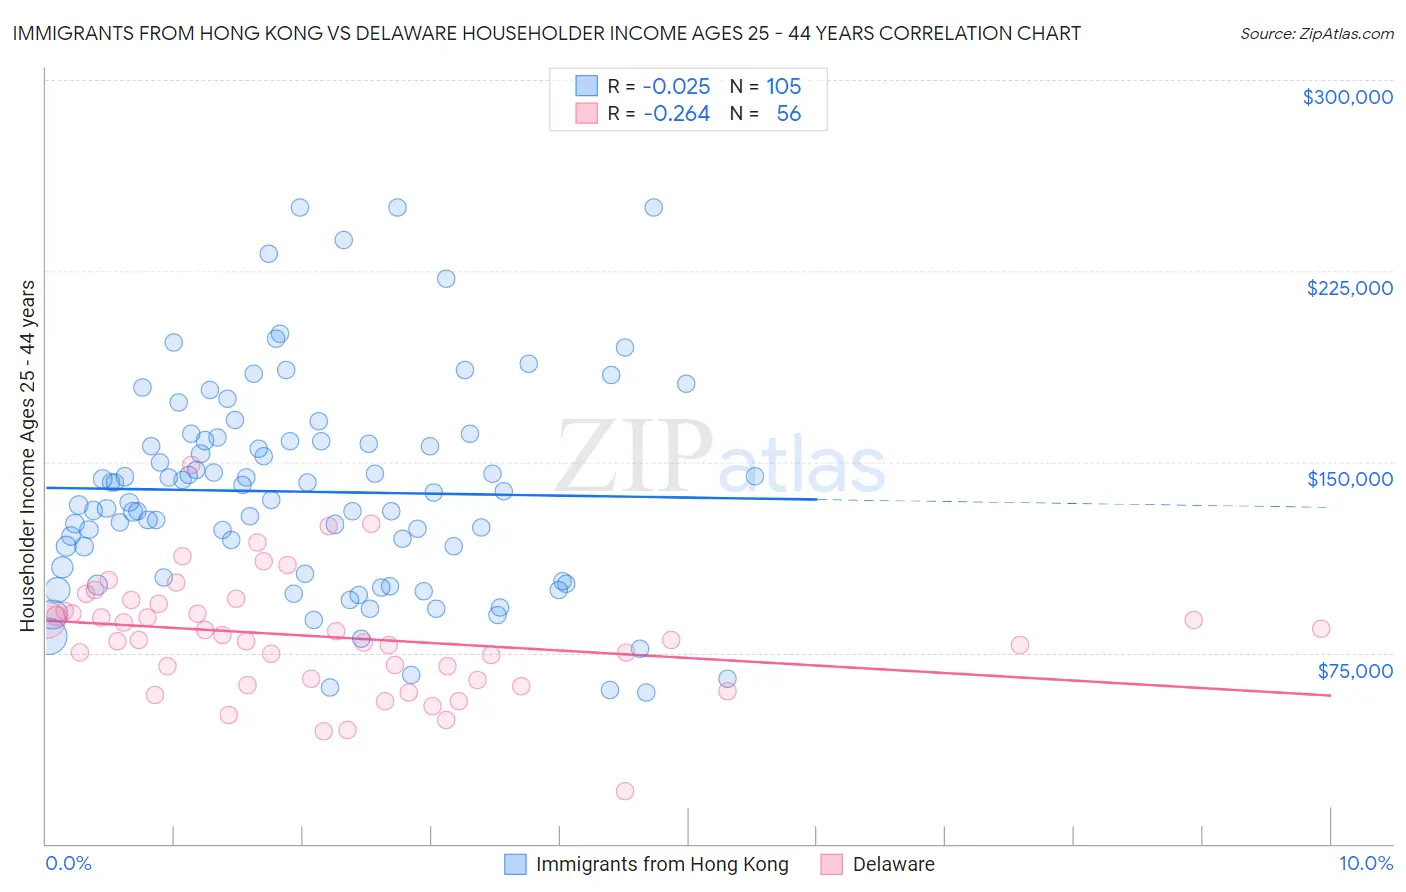 Immigrants from Hong Kong vs Delaware Householder Income Ages 25 - 44 years